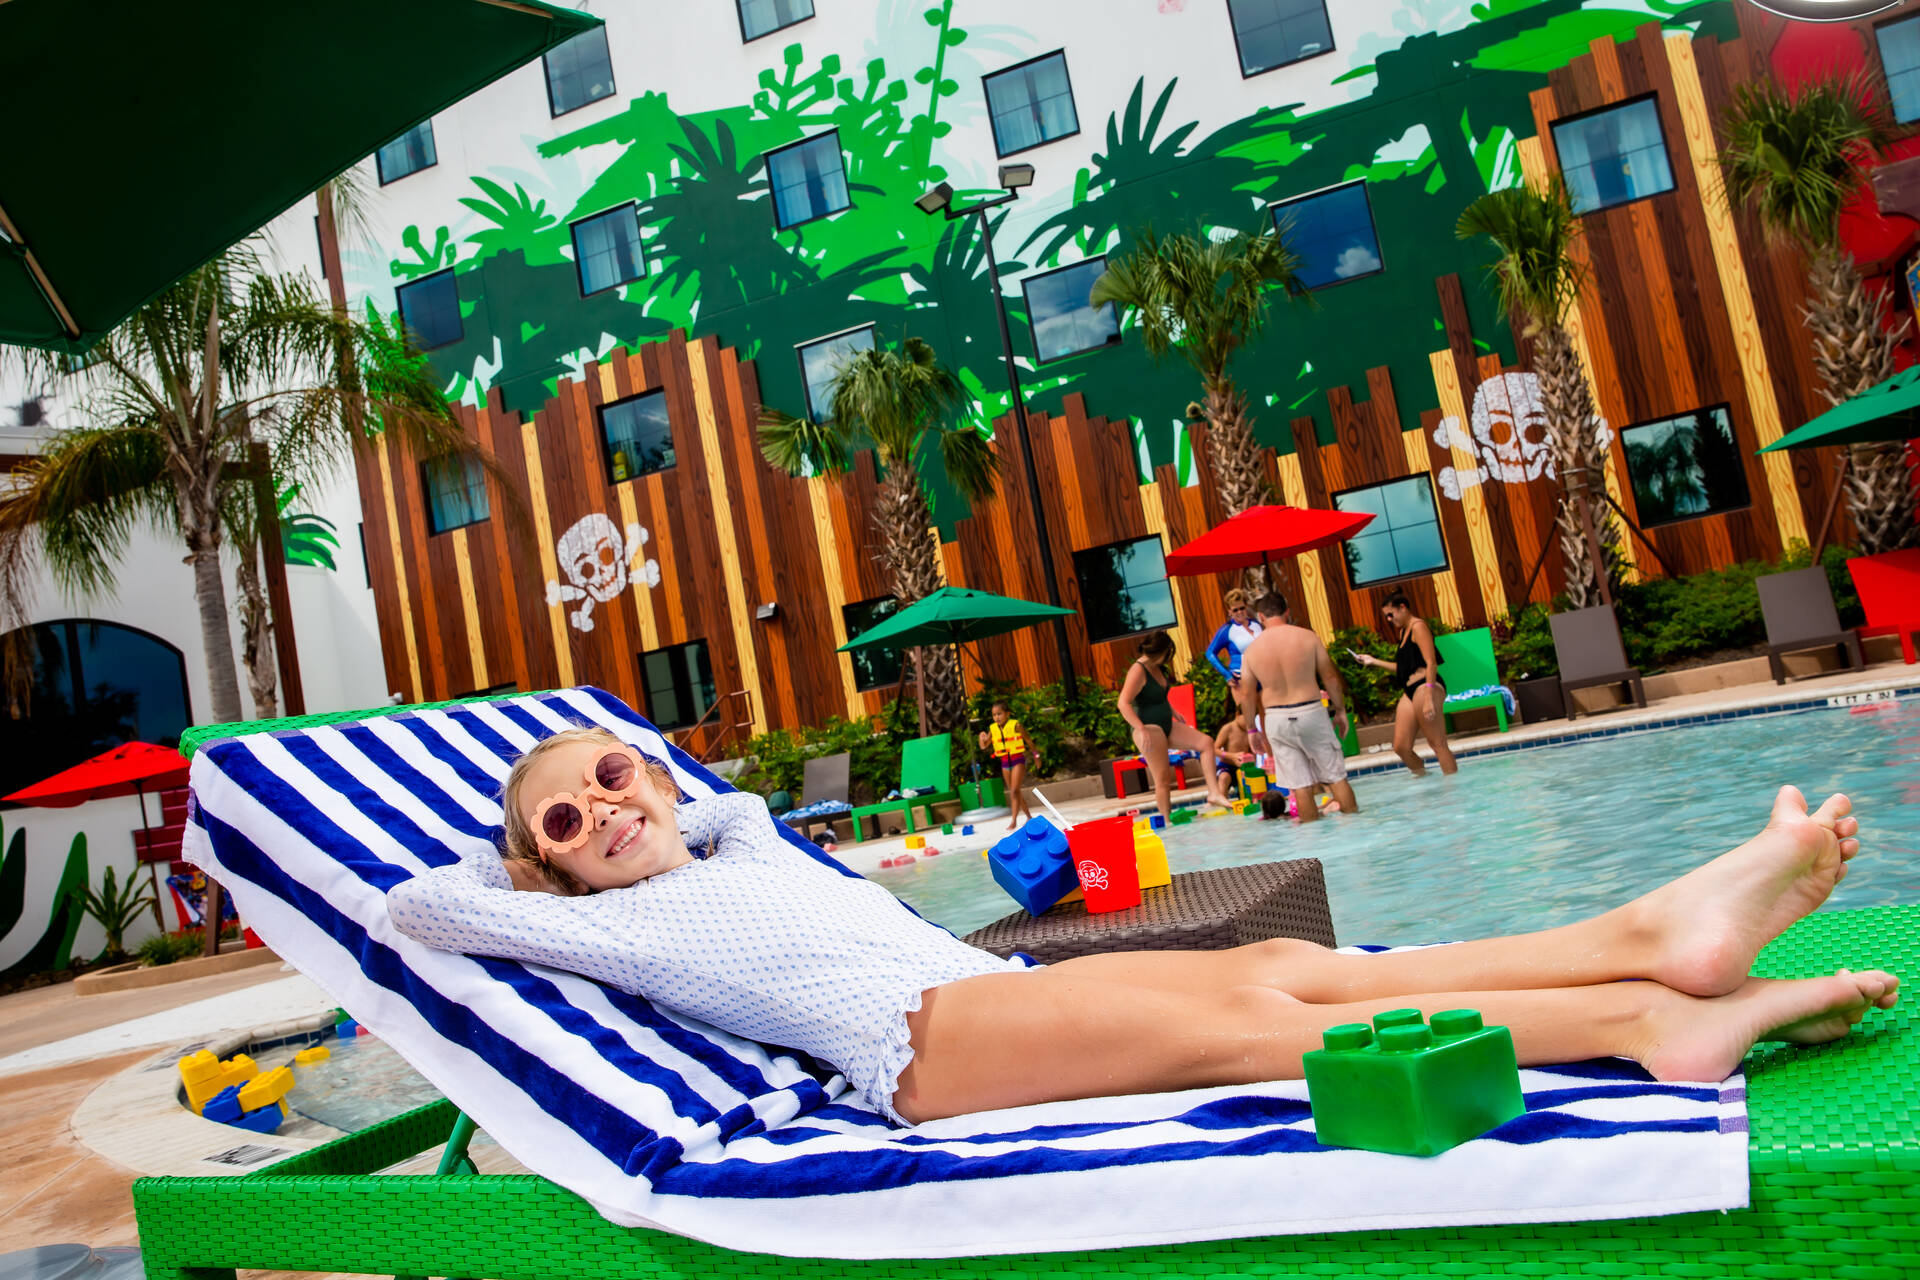 Girl Lounges at the Pirate Island Hotel Pool